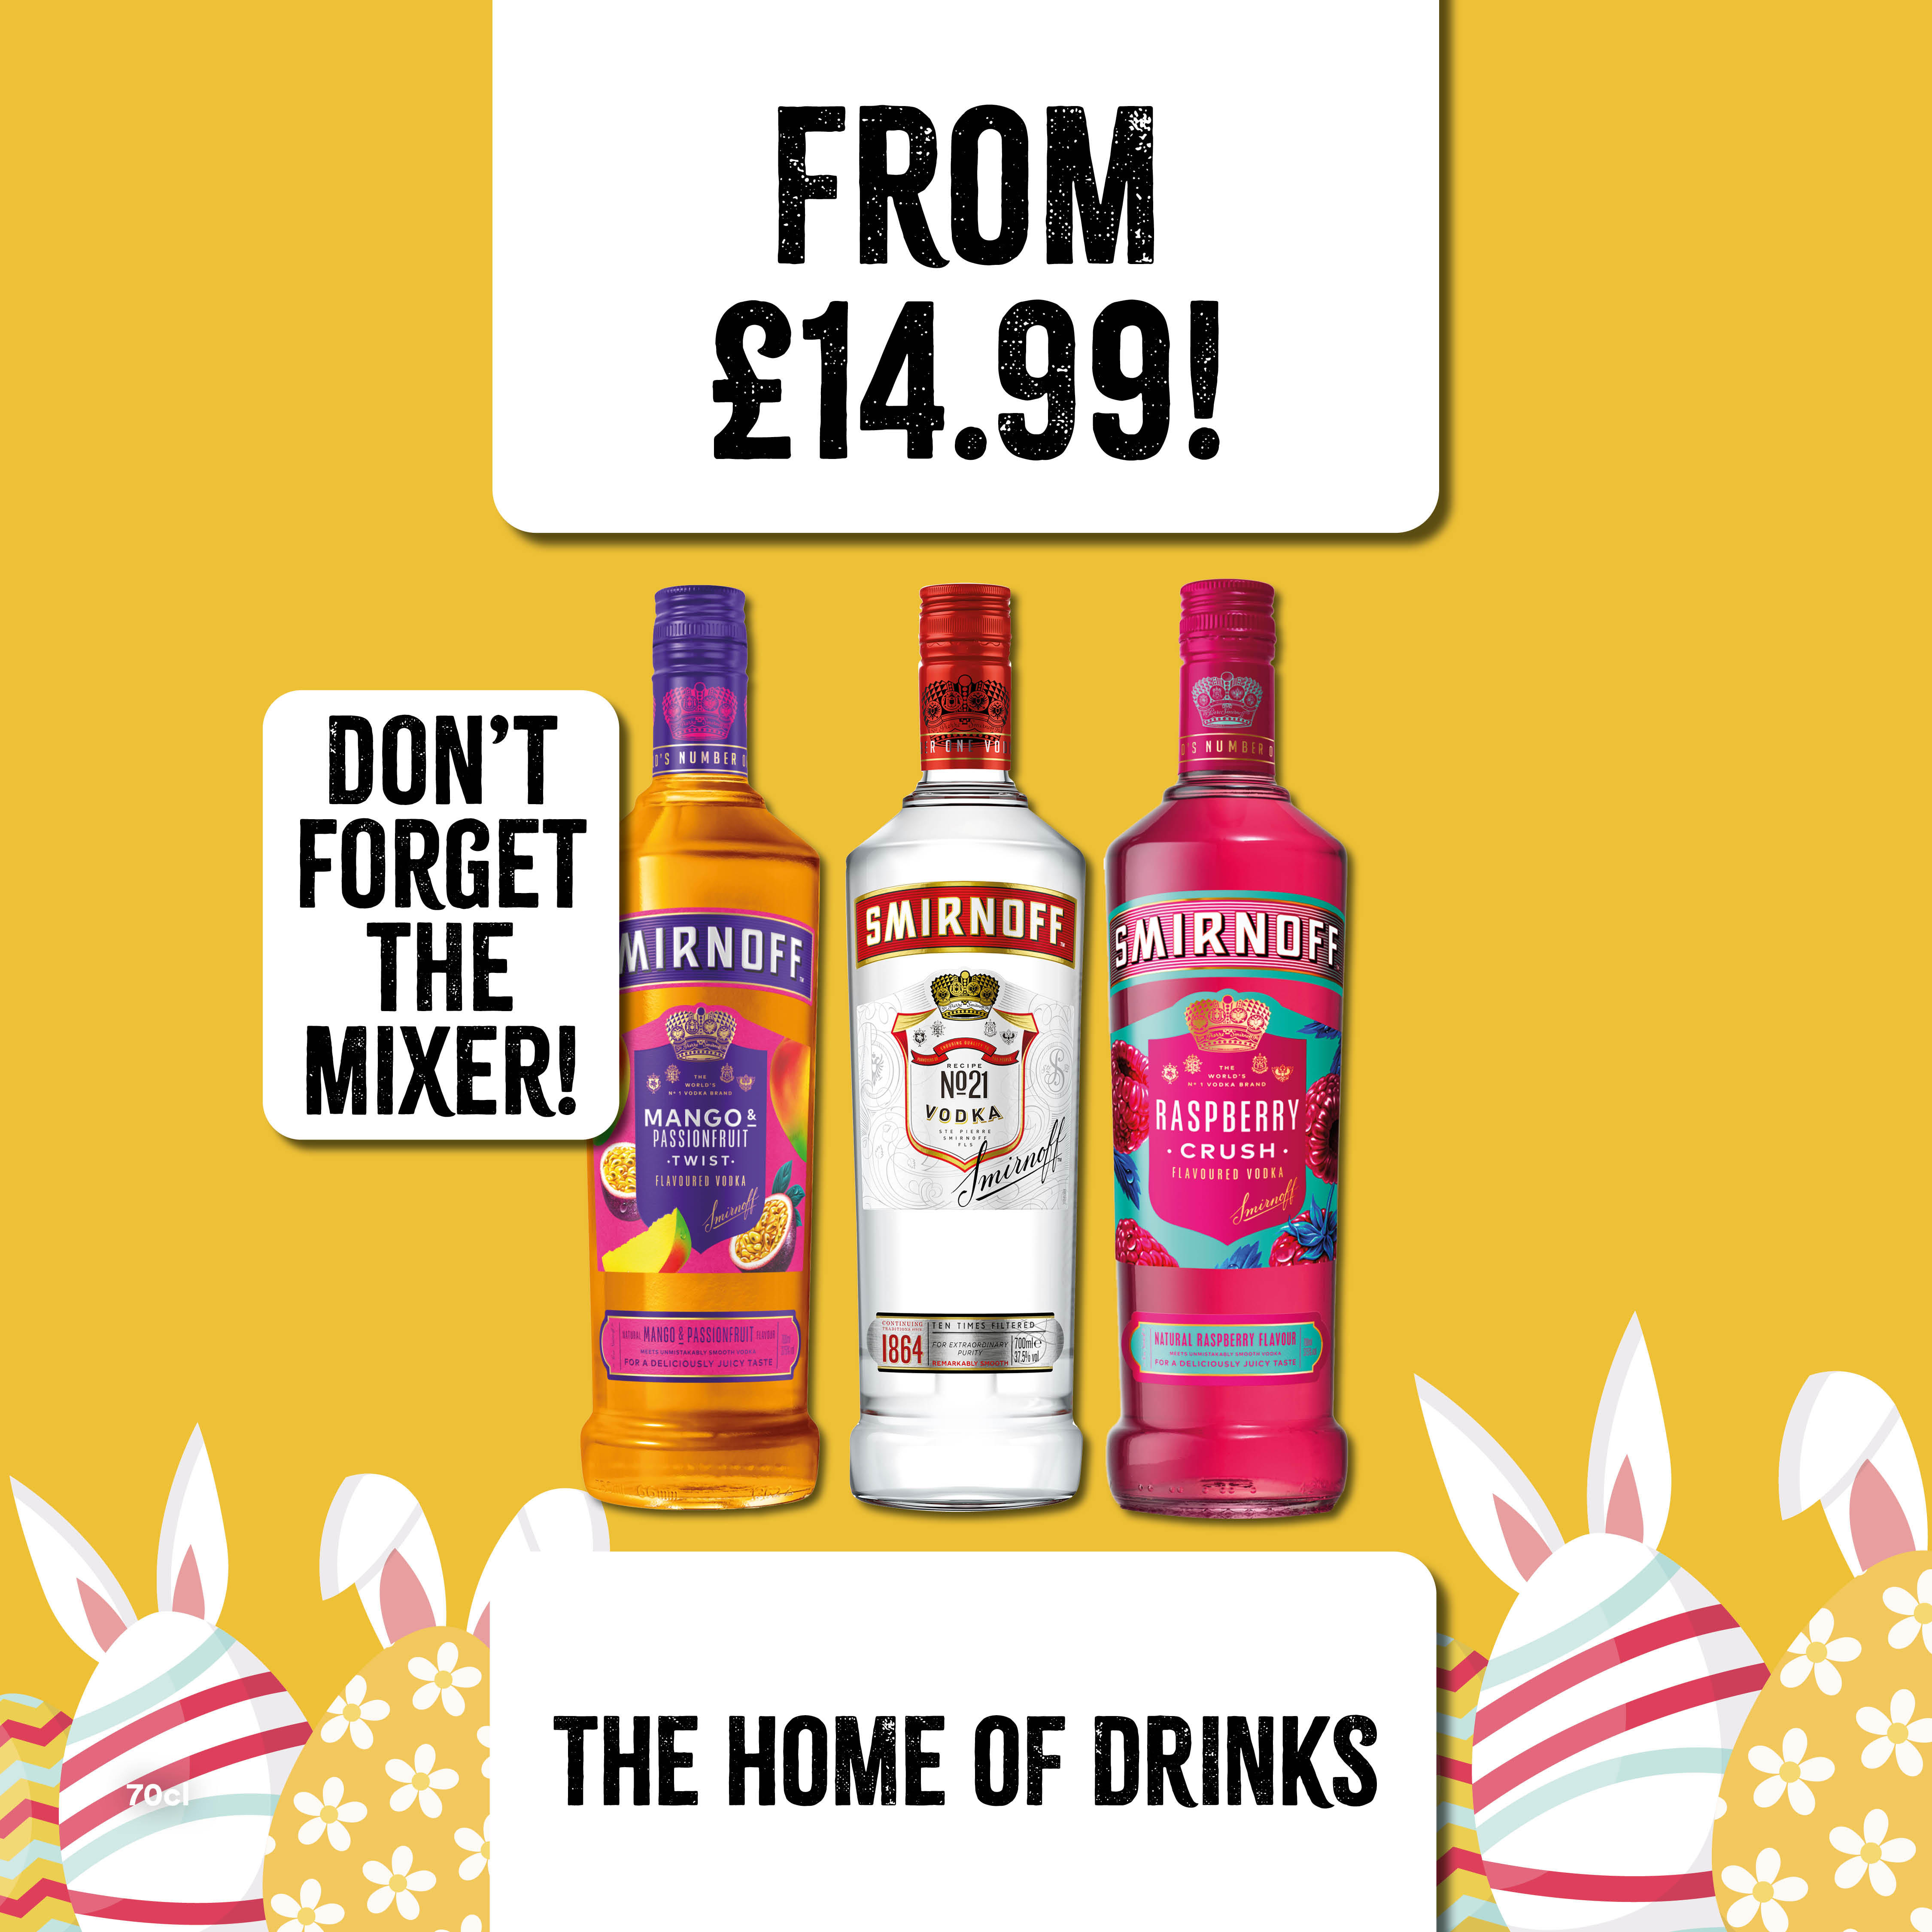 Smirnoff flavours - From £14.99 Bargain Booze Select Convenience Fleetwood 01253 283780